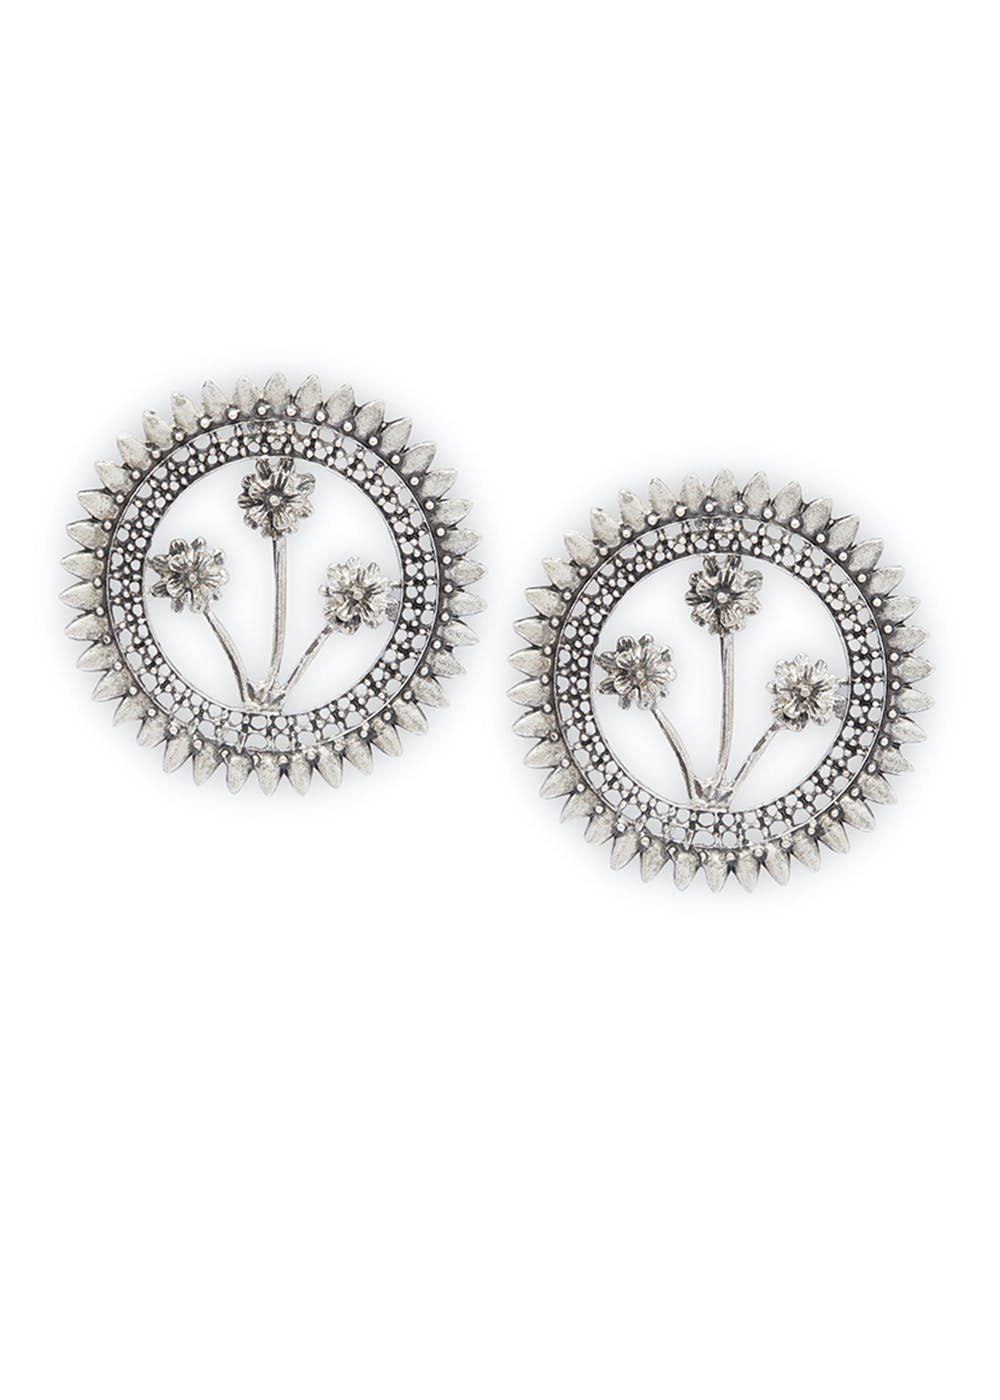 Get Dazzling Daisy Studs At Lbb Shop